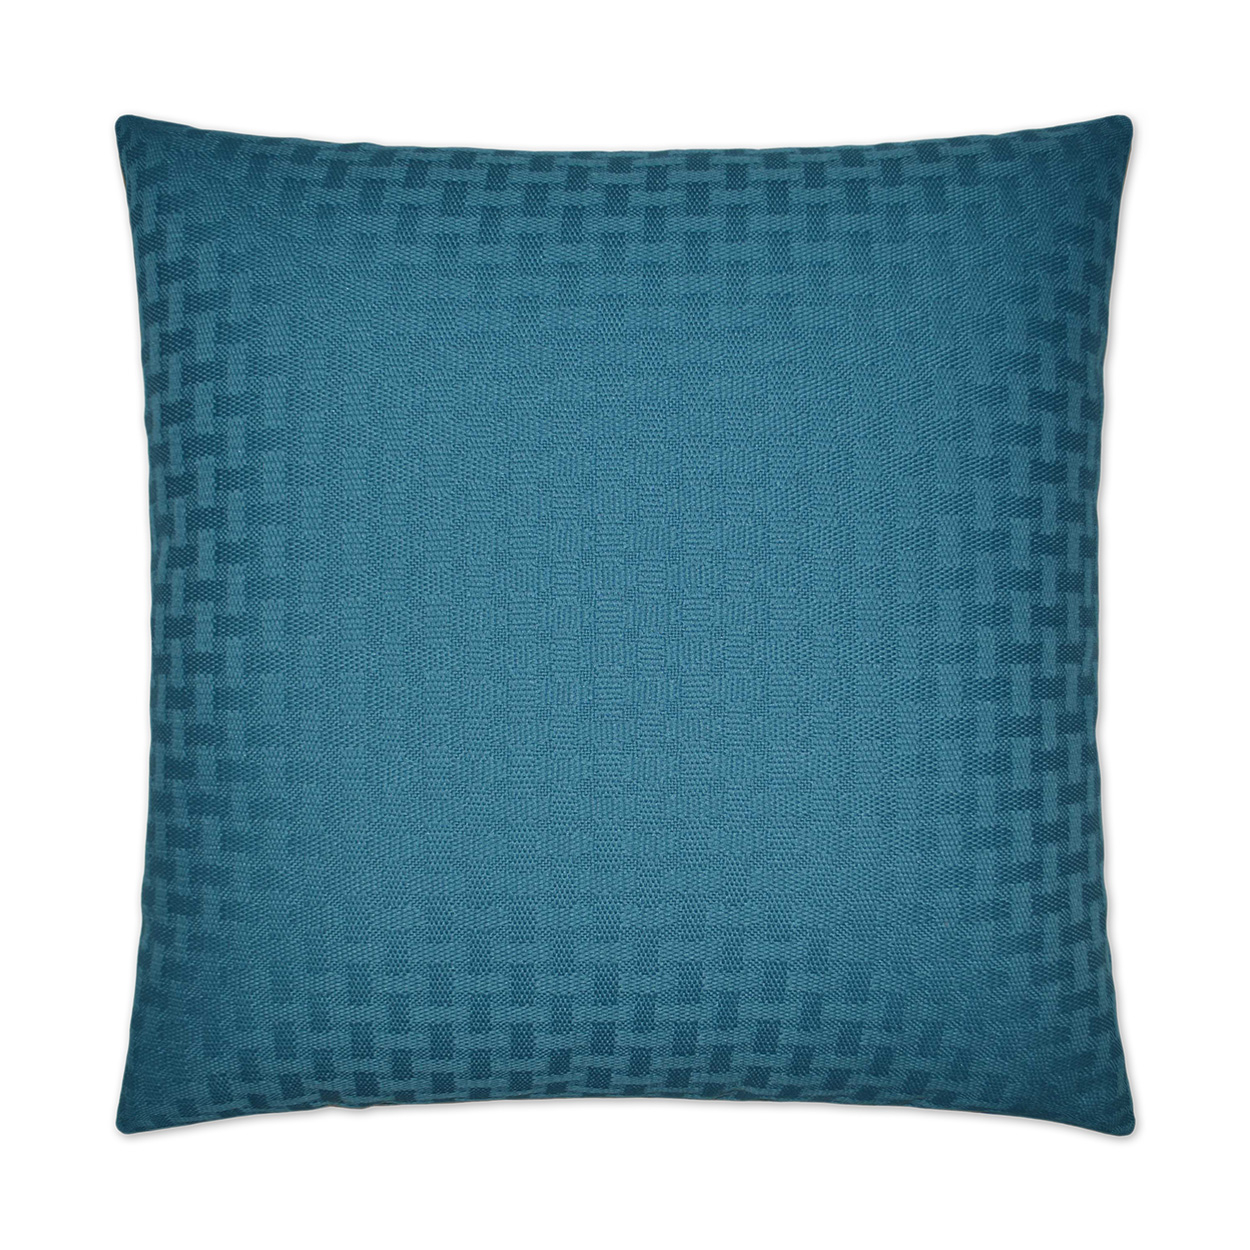 Carmel Weave Turquoise Outdoor Pillow 22x22